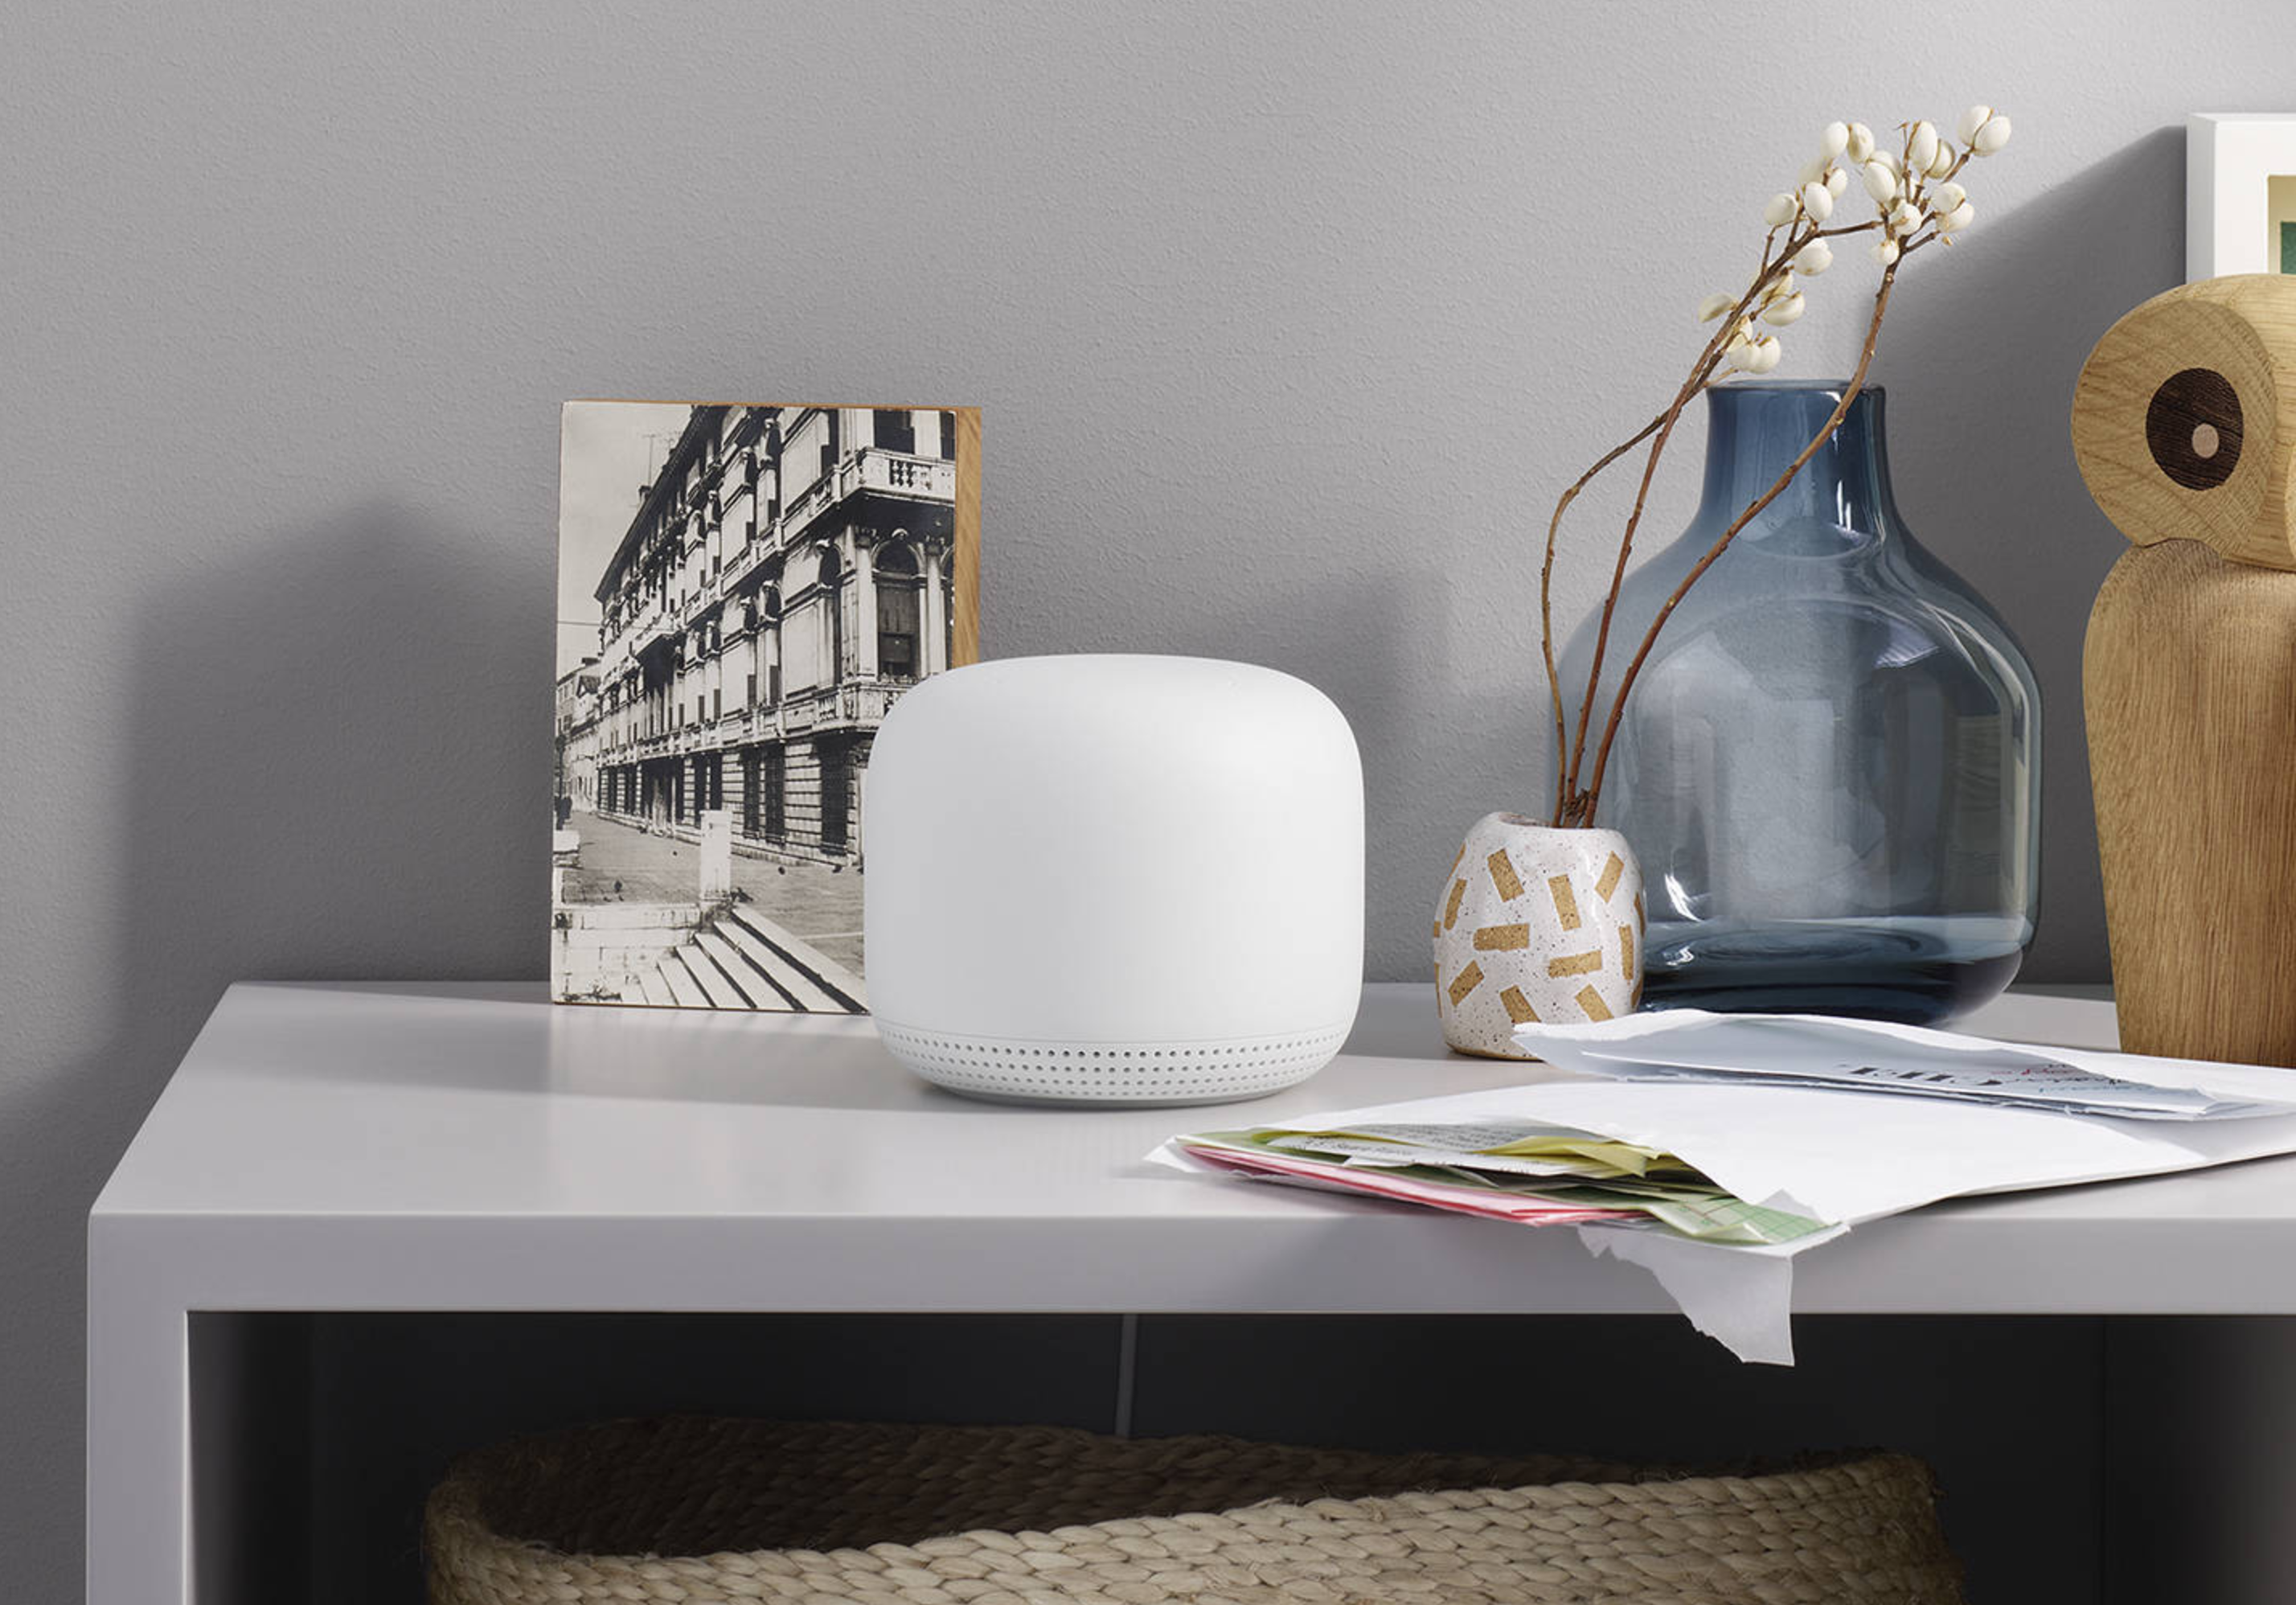 Google Nest Wifi - Home Wi-Fi System - Wi-Fi Extender - Mesh Router for  Wireless Internet - 2 Pack